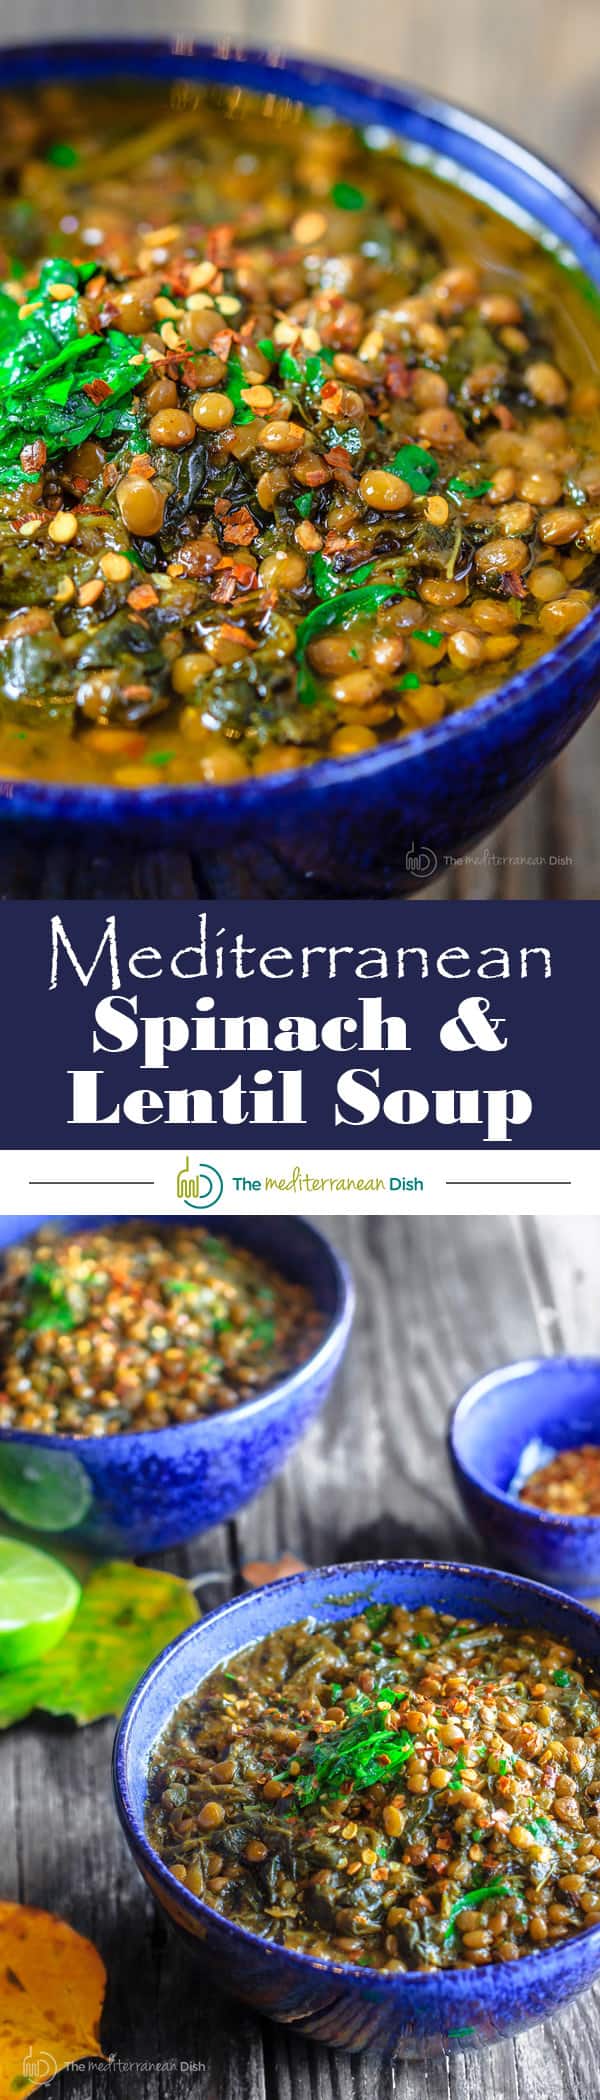 Mediterranean Spicy Spinach Lentil Soup Recipe| The Mediterranean Dish. A nutritious, flavor-packed lentil soup that comes together in minutes. Following the Mediterranean diet is easy with meals like this lentil soup! 